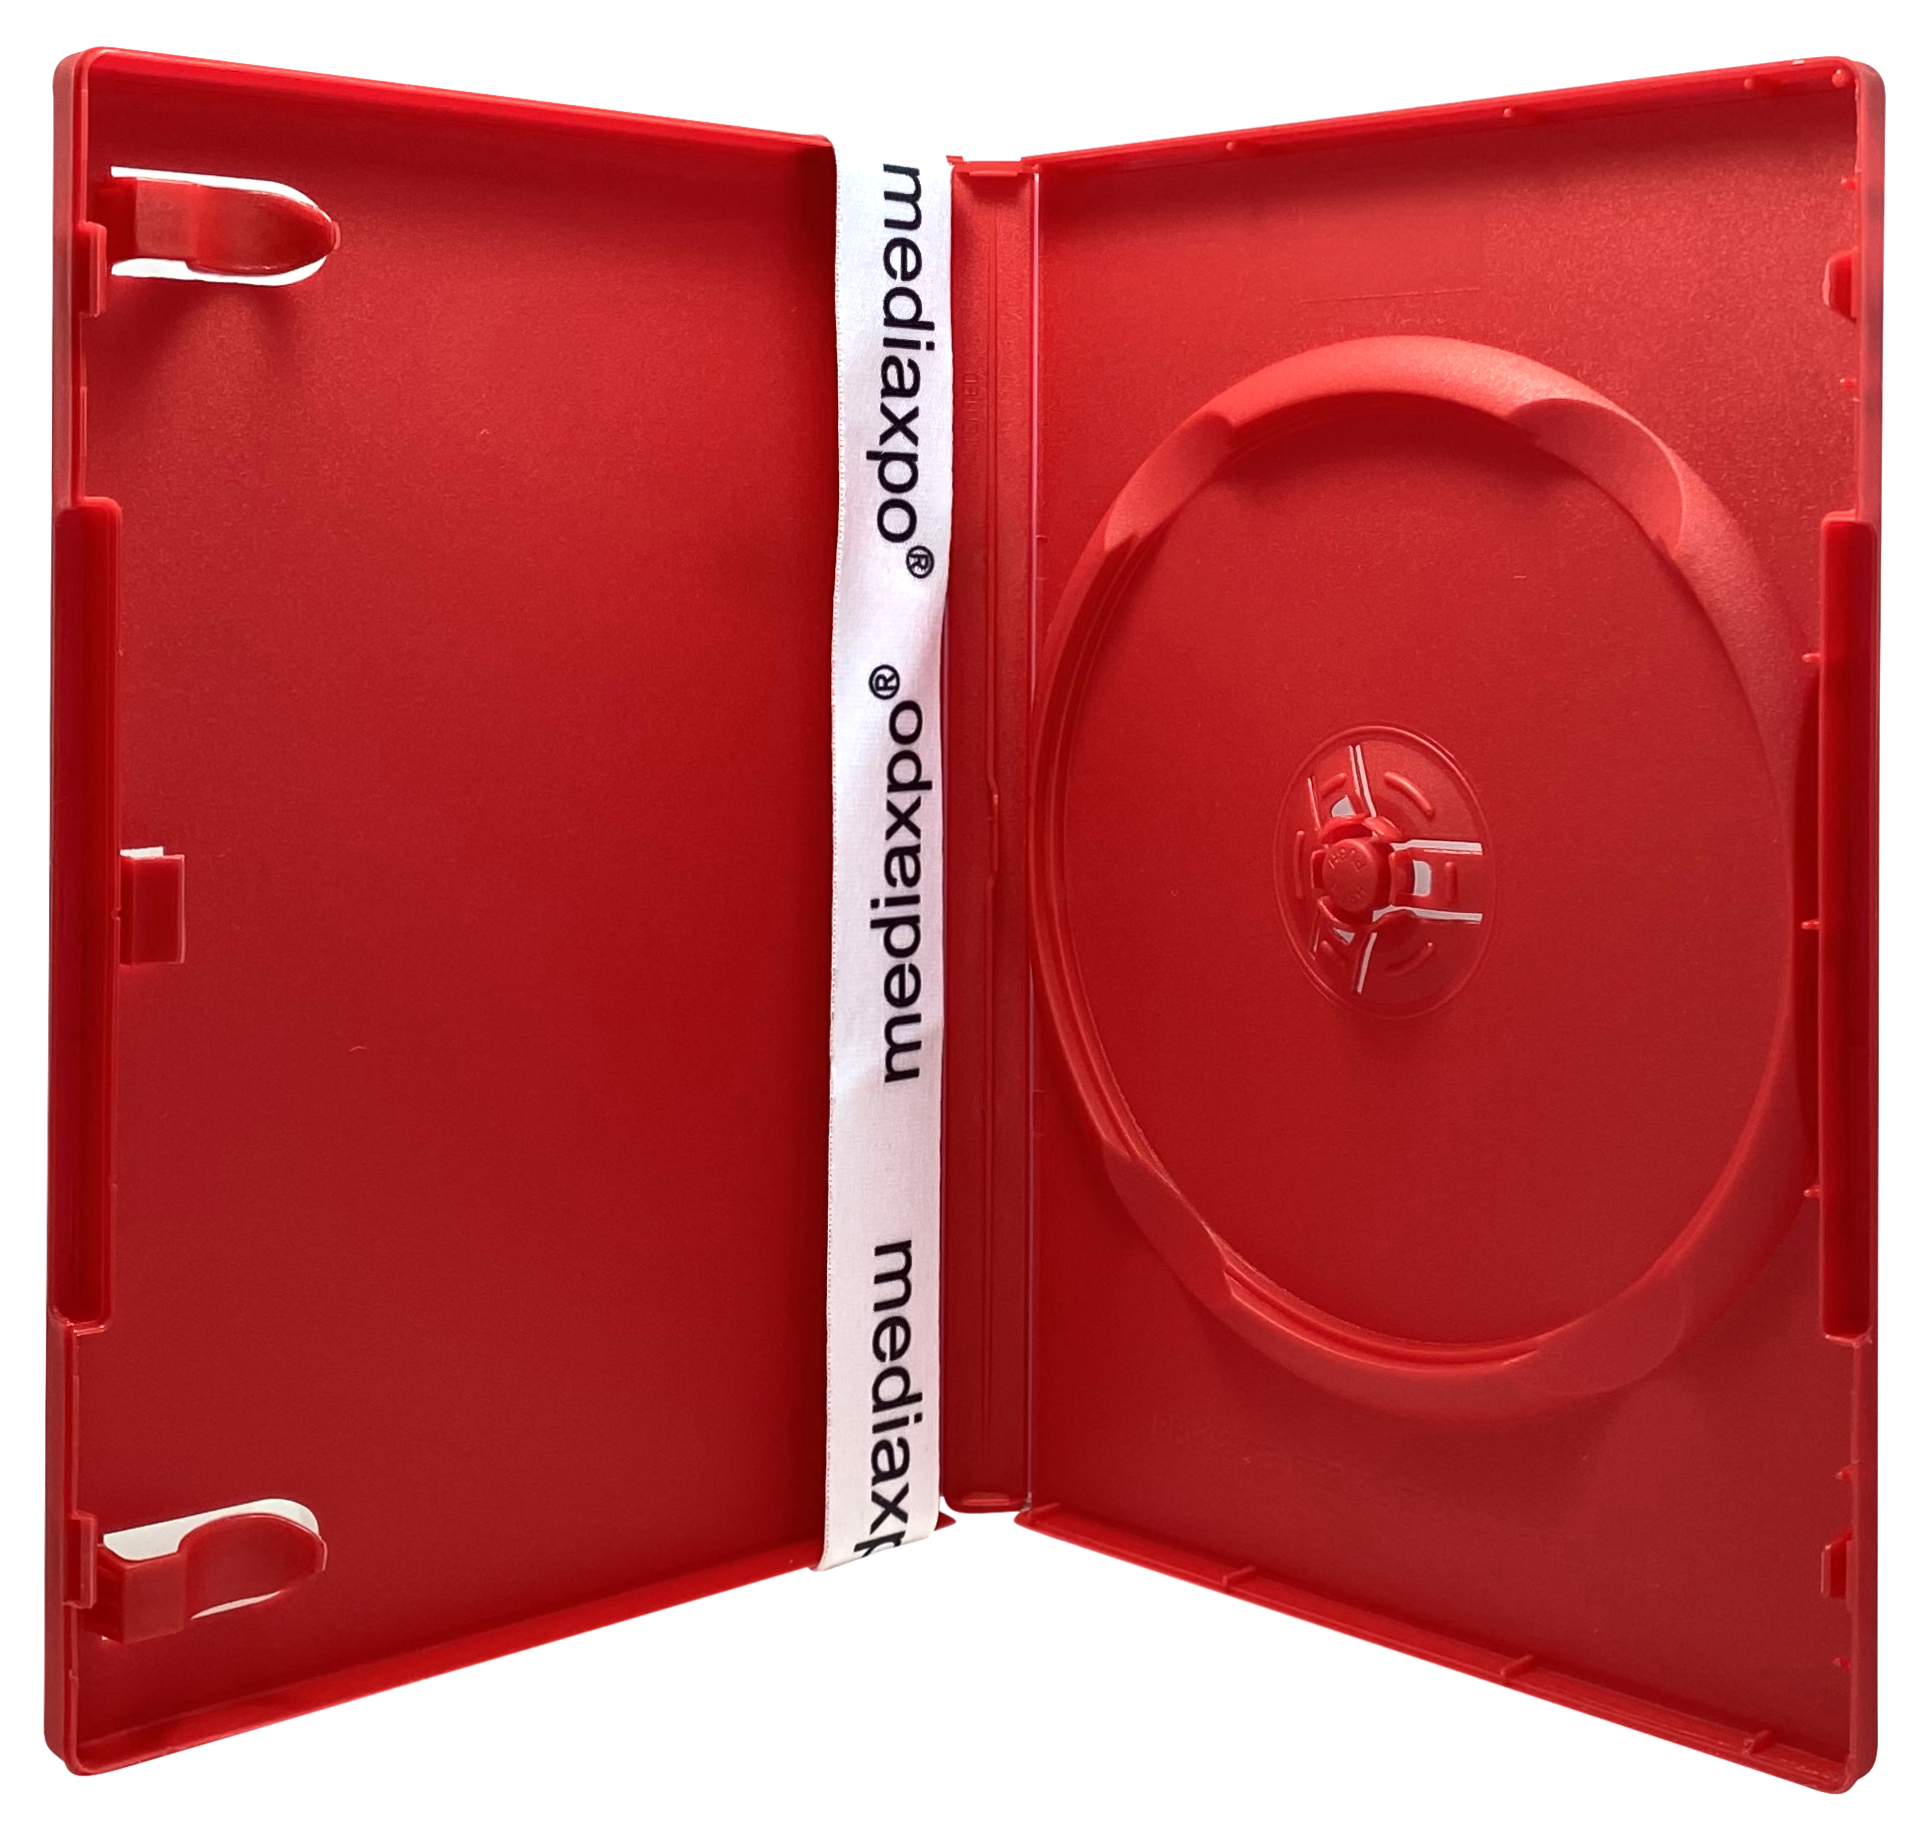 Image of ID 1214260167 500 STANDARD Solid Red Color Single DVD Cases